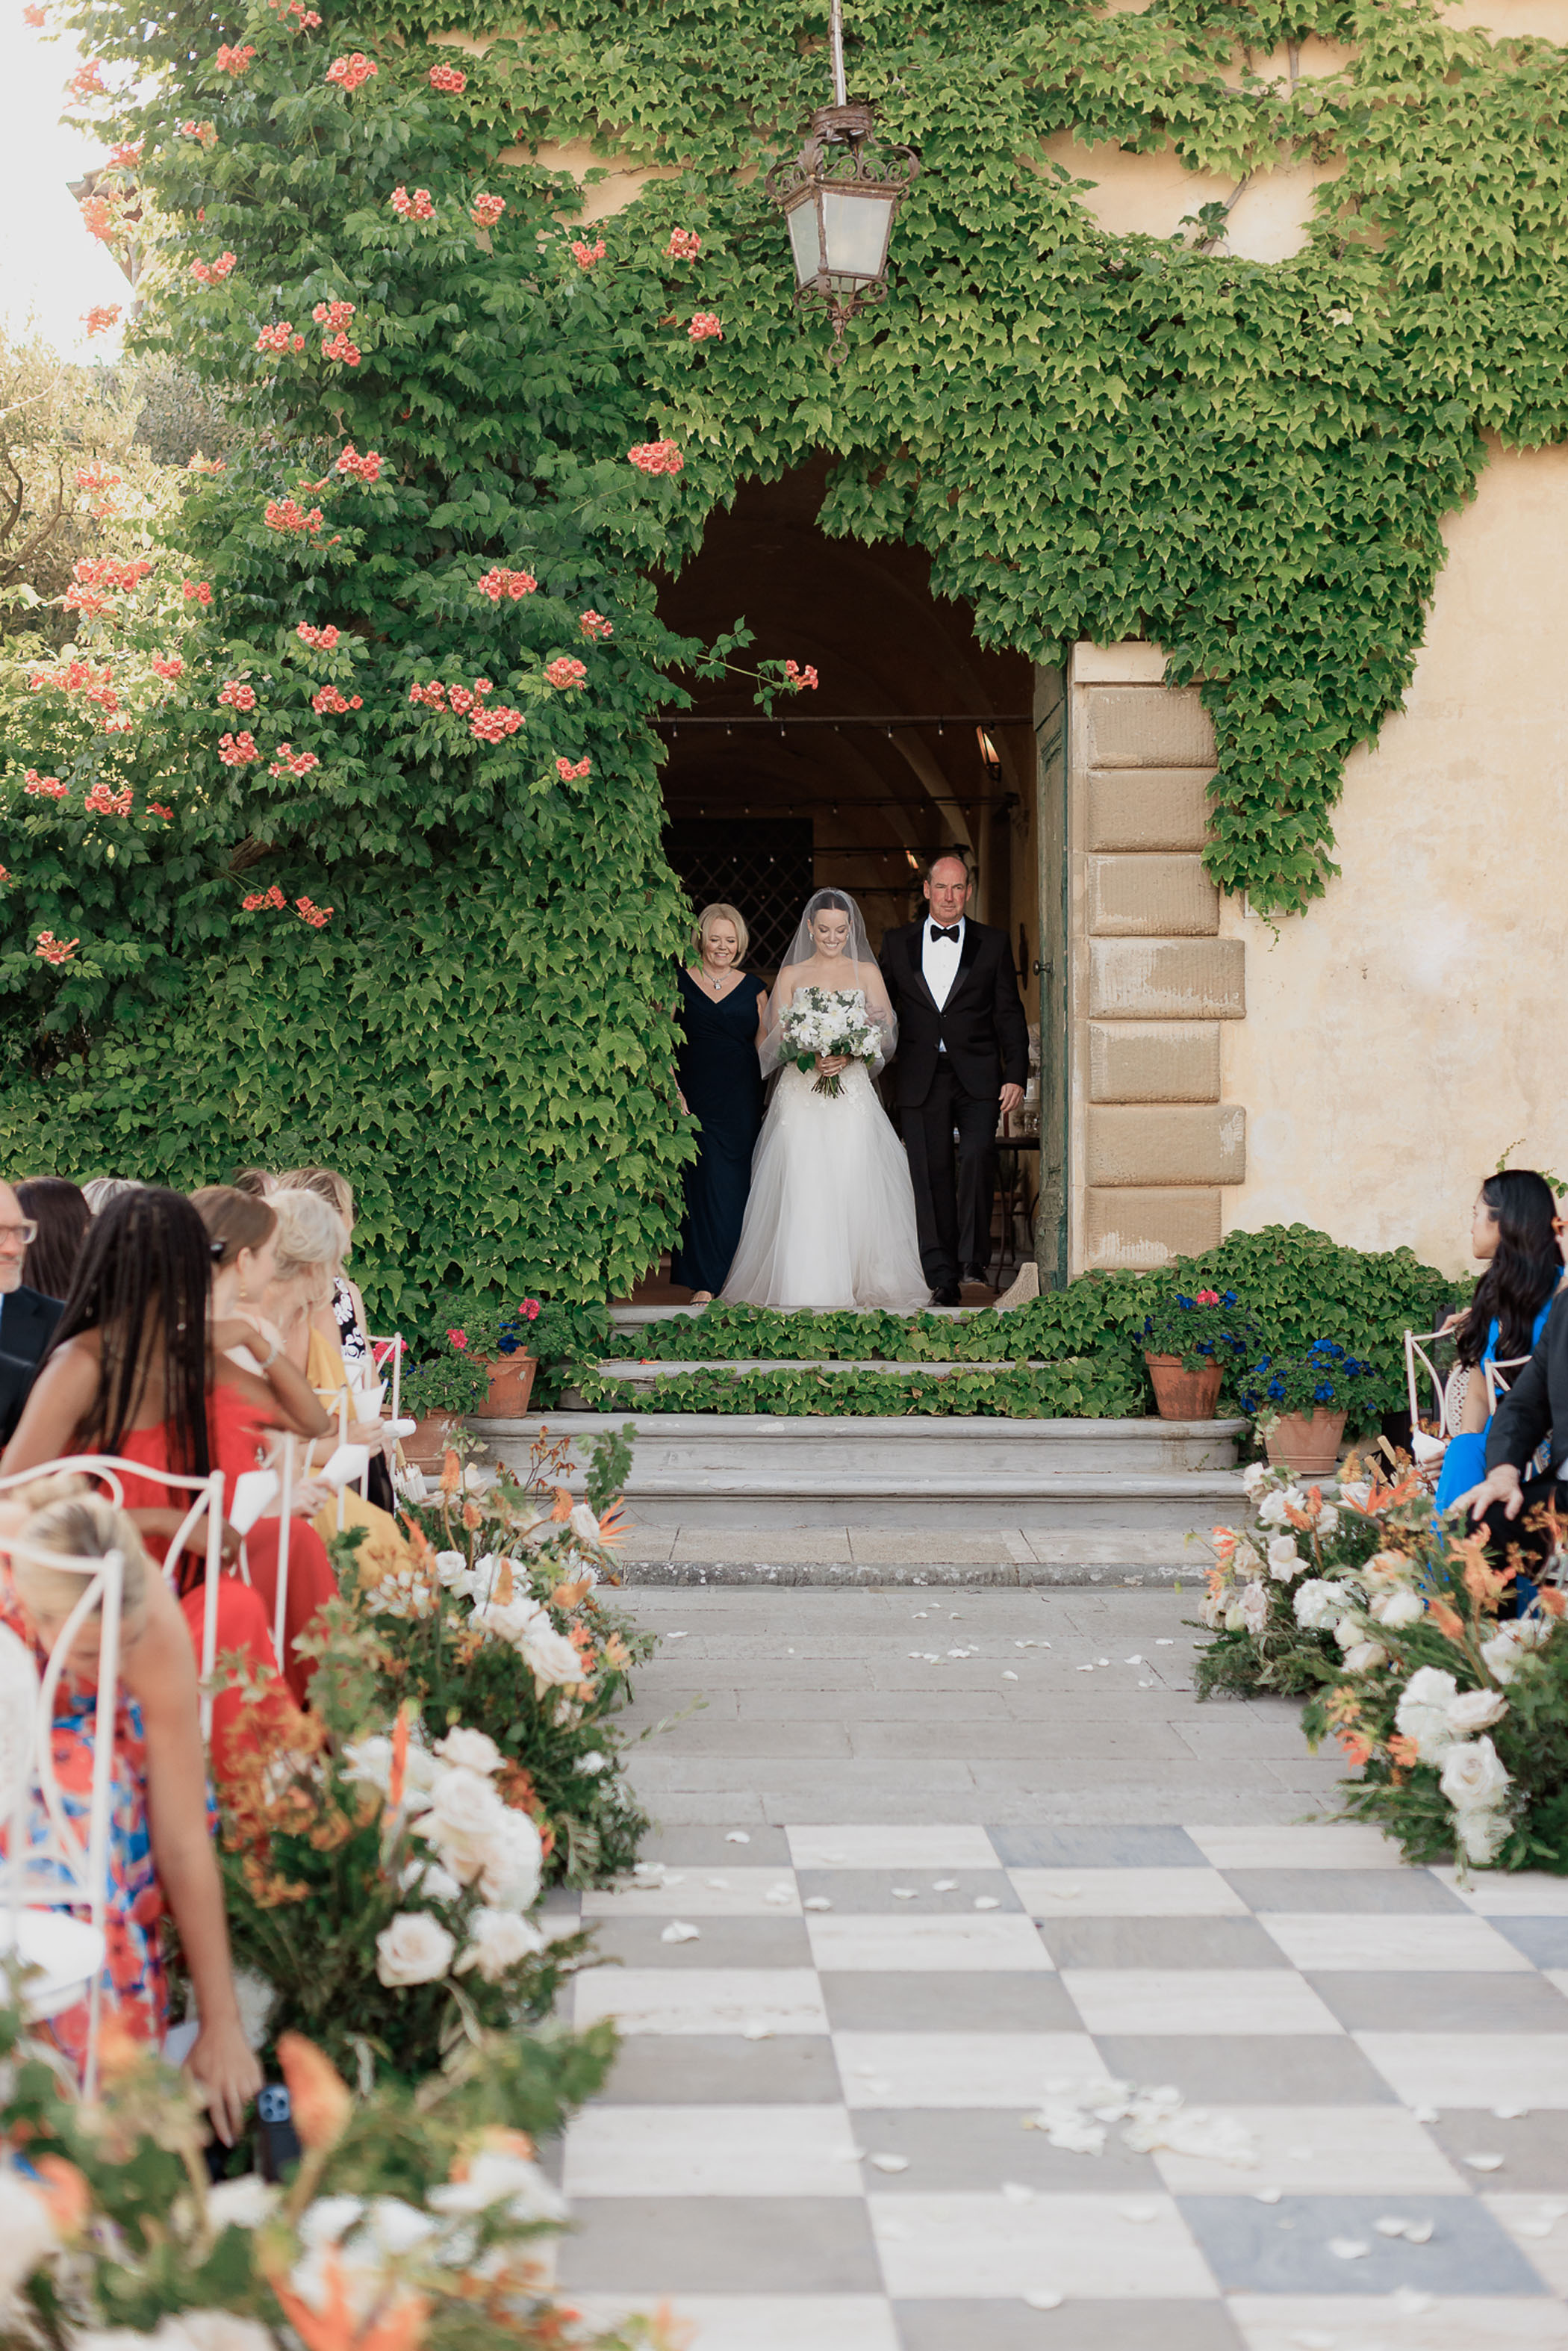 Modern Classic, A colorful wedding at Villa il Palagio in the heart of Tuscany